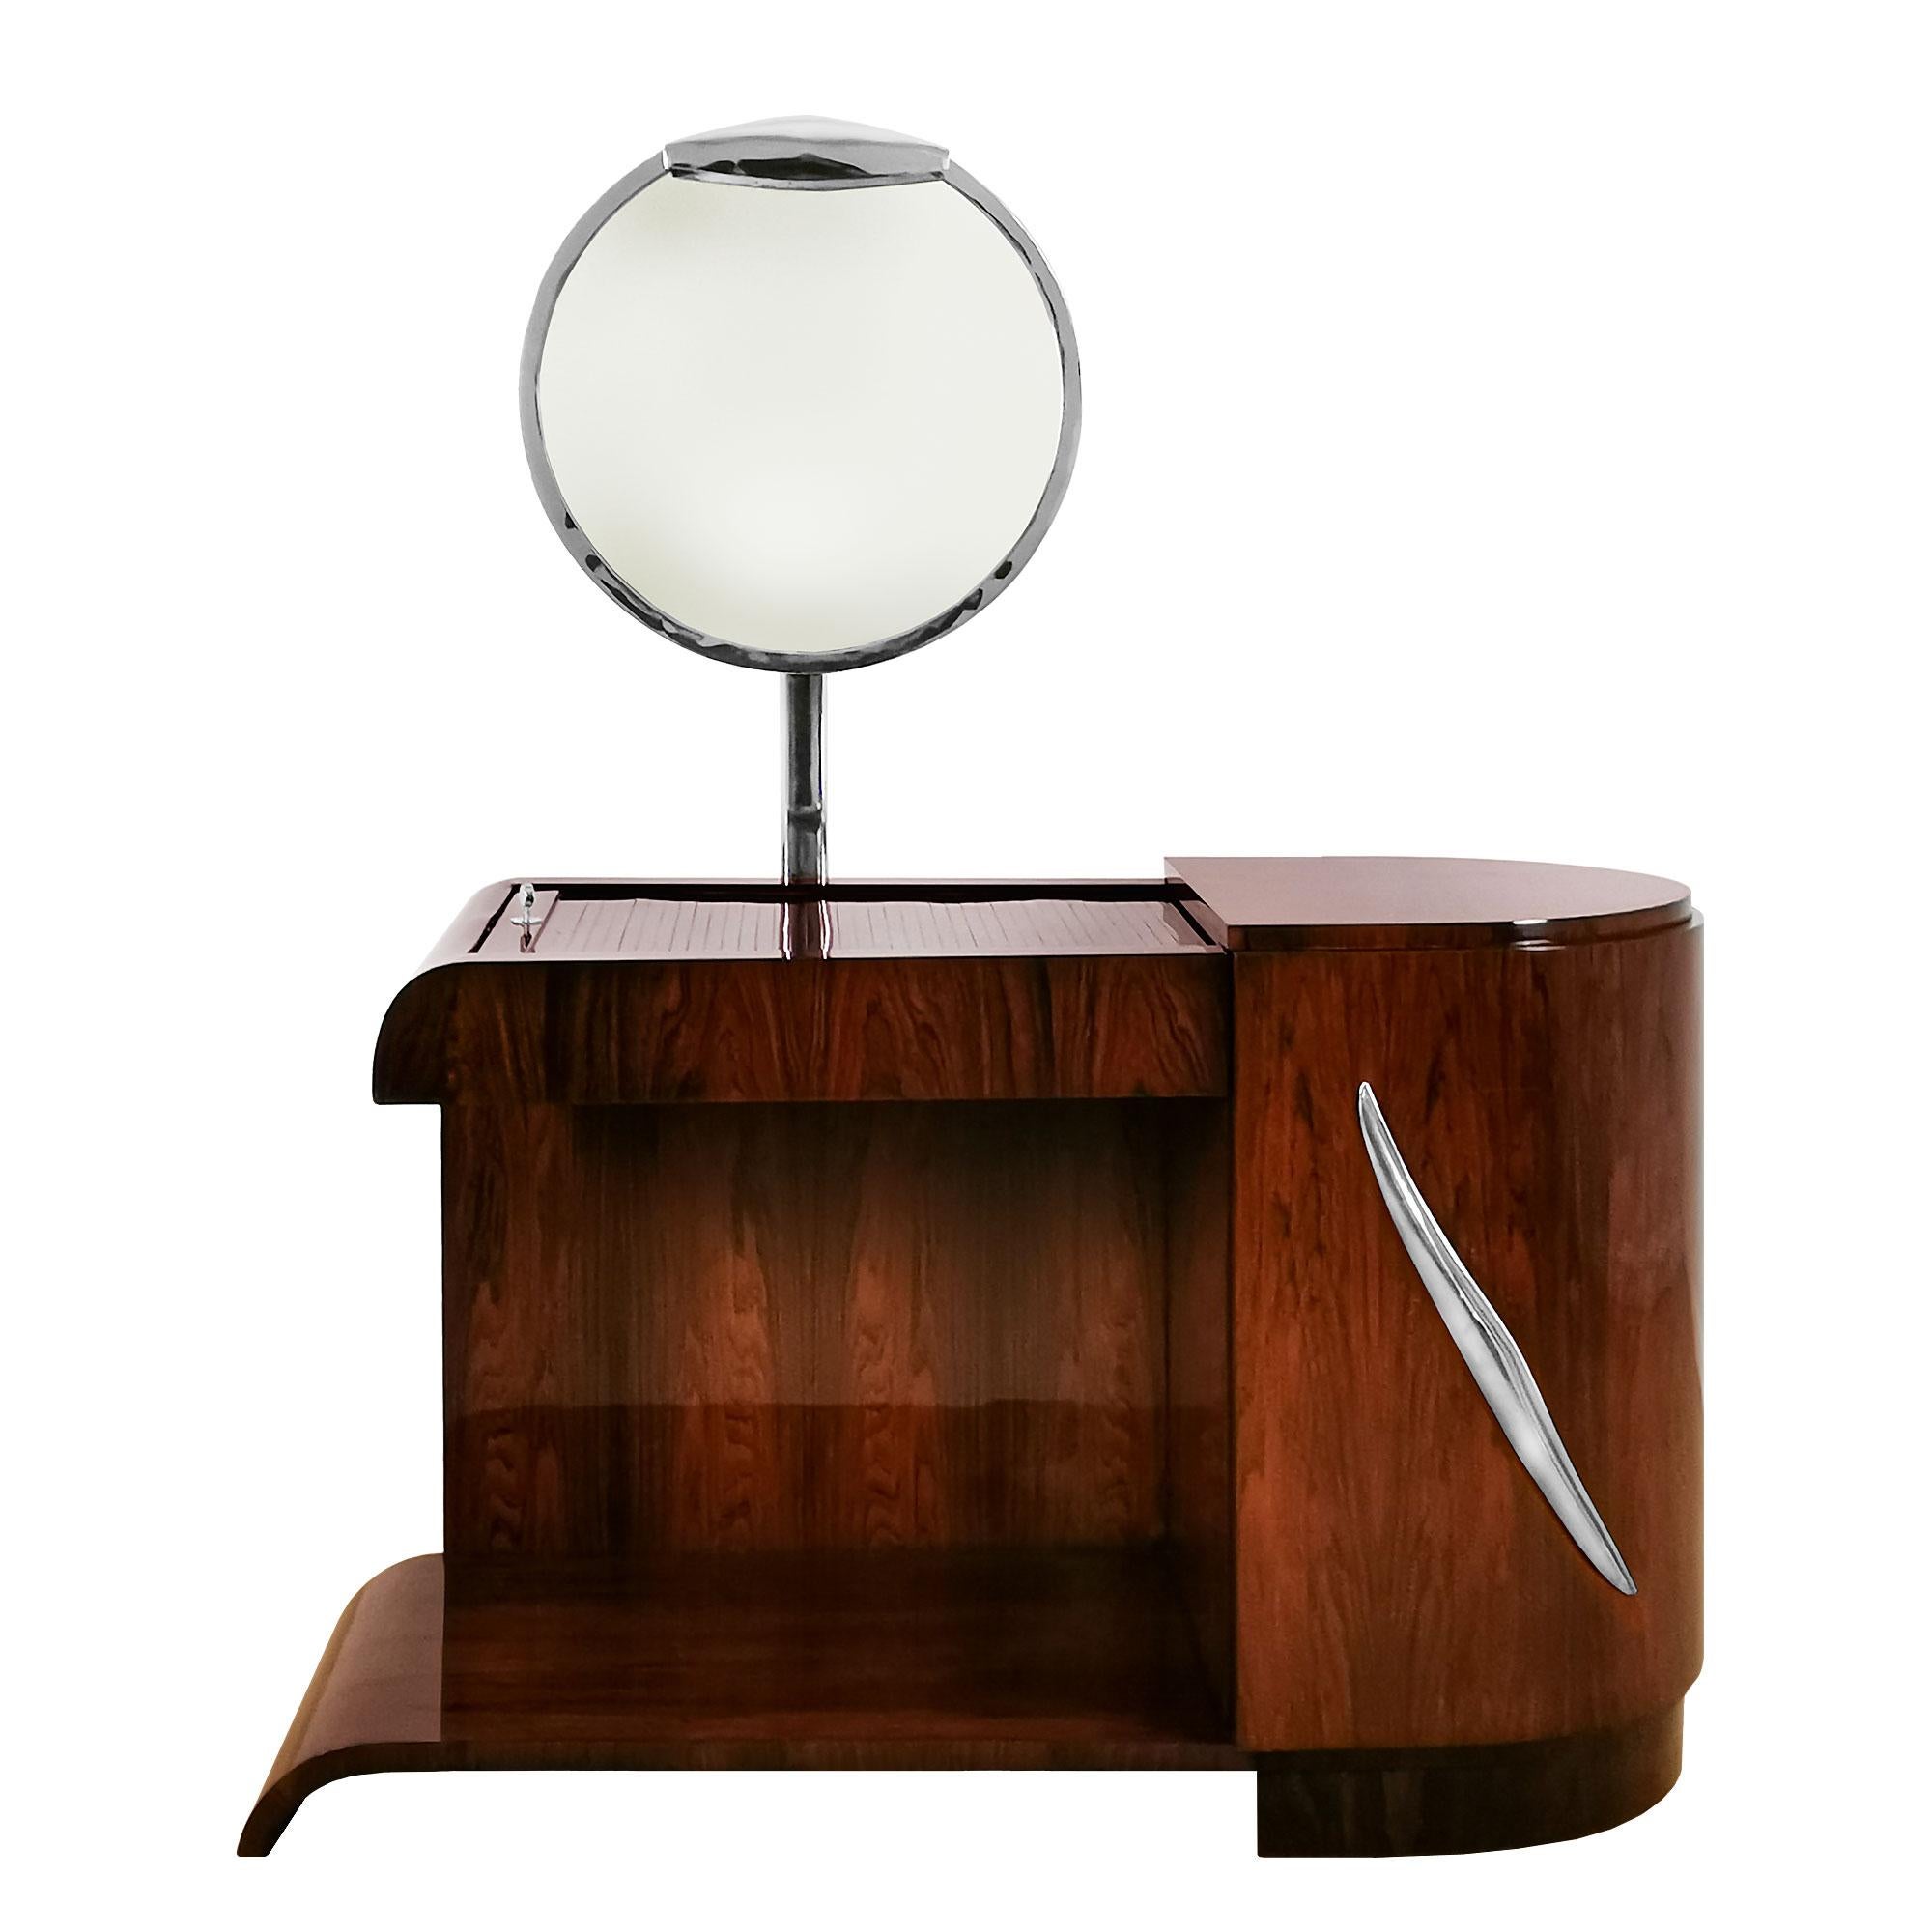 Exceptional Art Deco vanity, mahogany veneer with a sliding blind on top and a big door on the front, swiveling luminescent mirror and nickel plated brass handle, 4 sides completely finished.
France circa 1930.